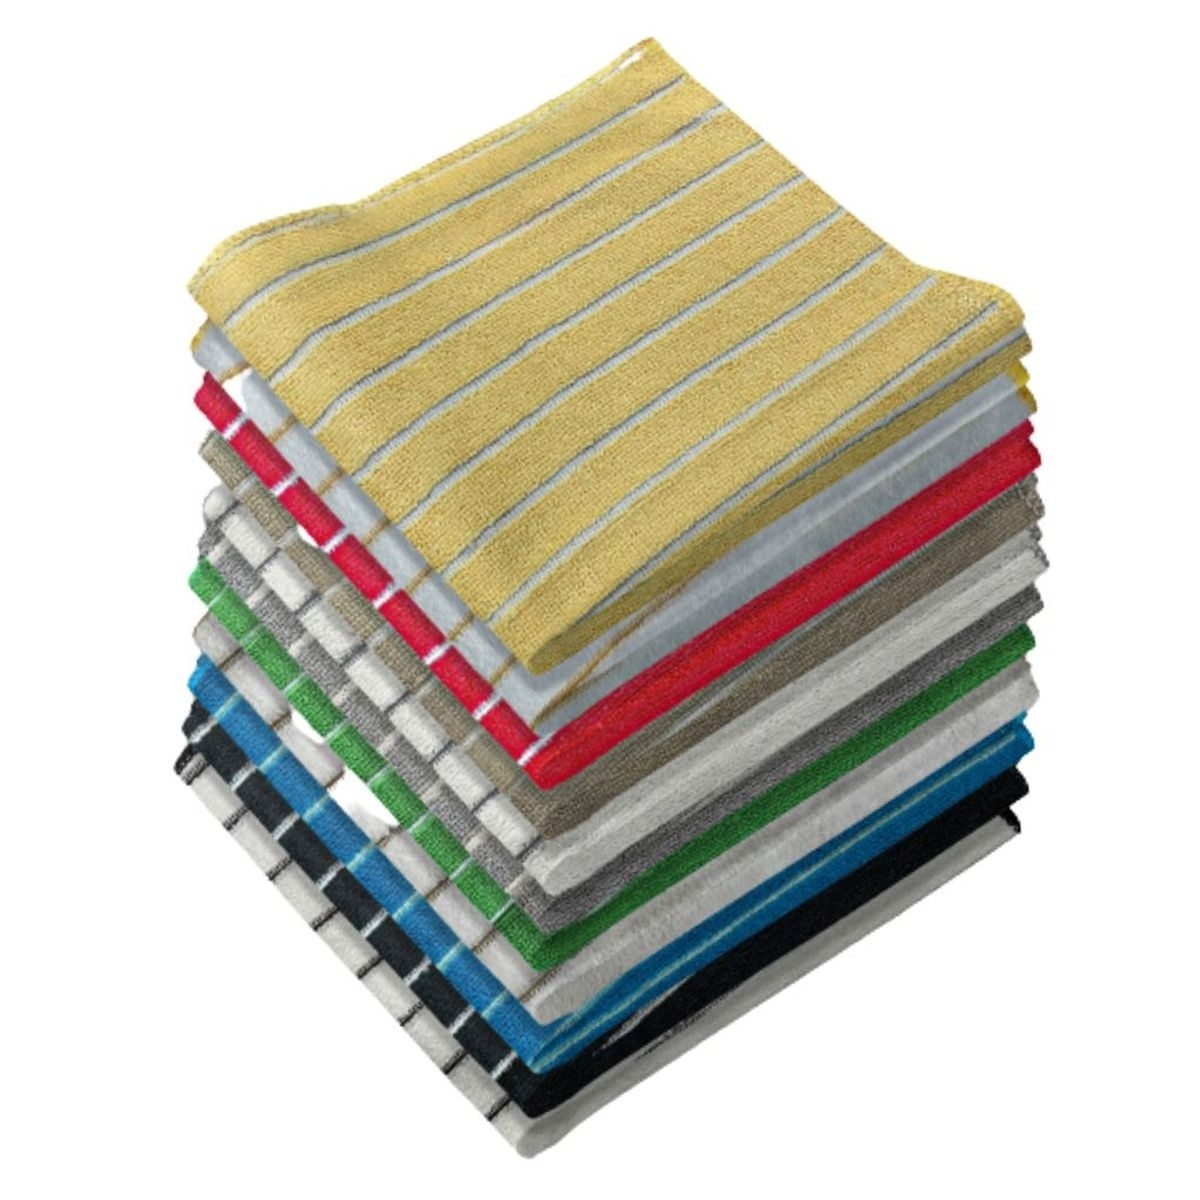 20-Pack: Ultra-Absorbent Multi Use Cleaning Super Soft Microfiber Dish Utility Rag Cloths - Striped